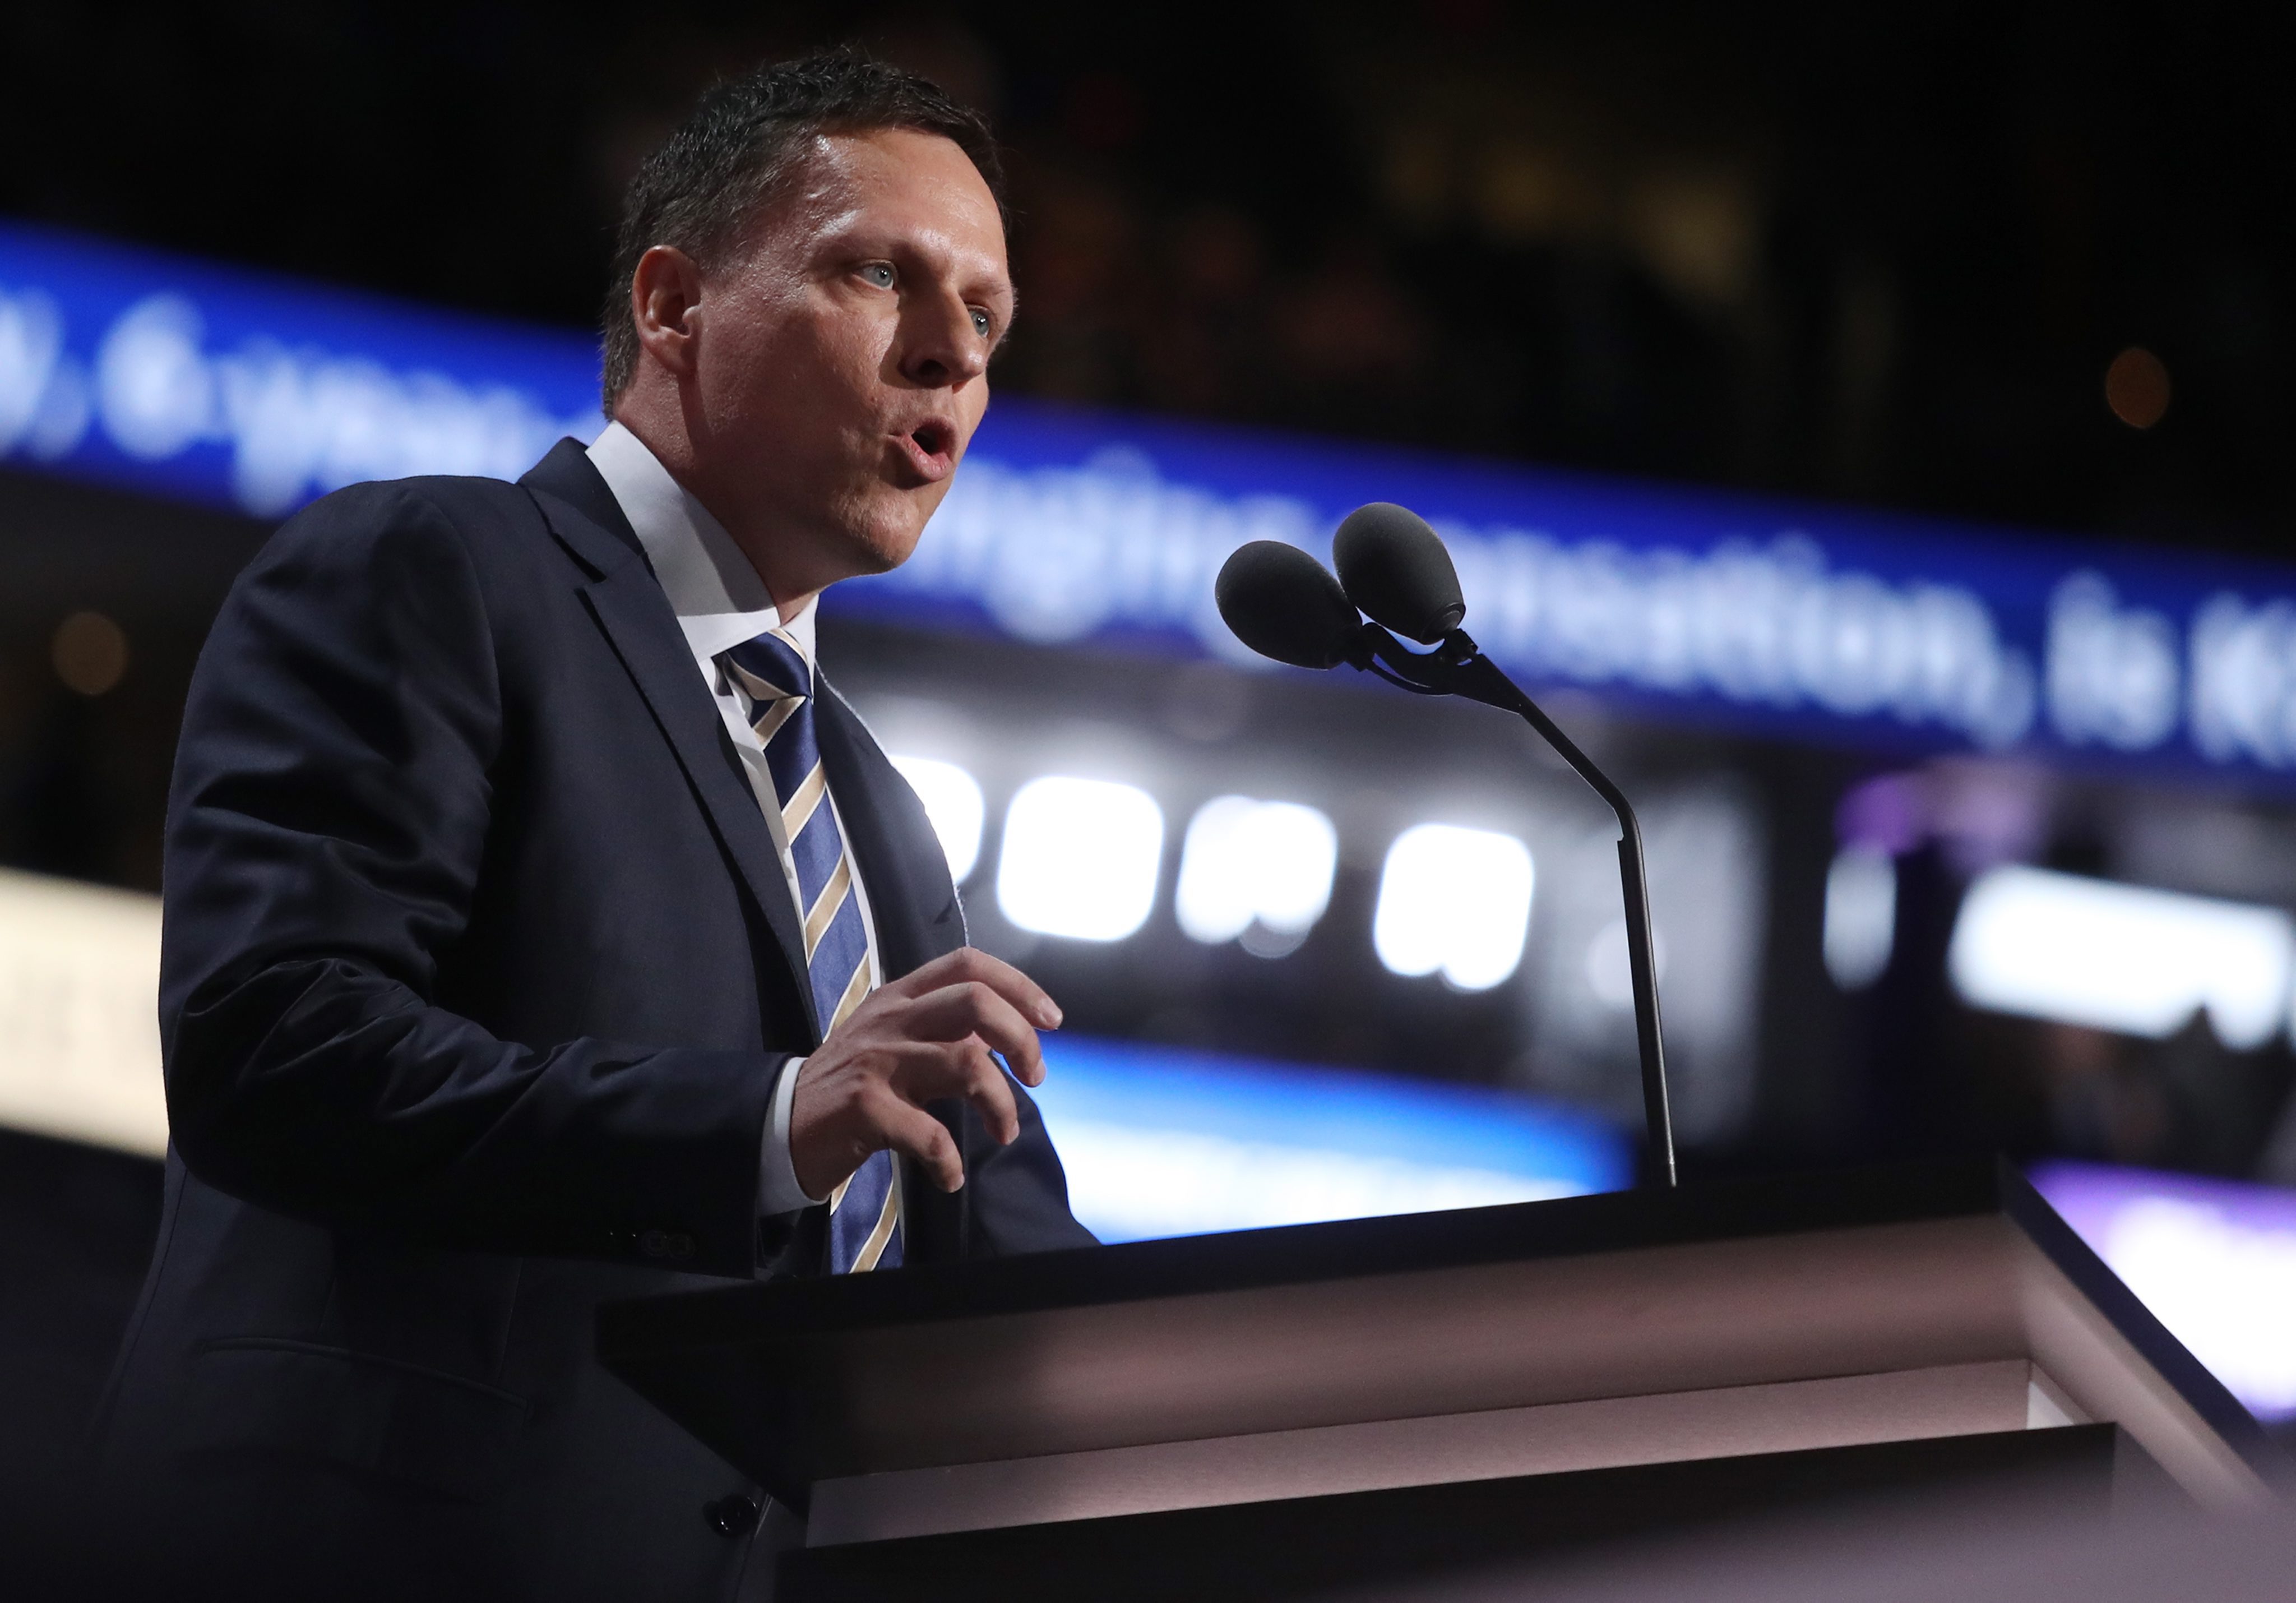 2016-07-21 16:26:52 epa05435871 Peter Thiel speaks during the final day of the 2016 Republican National Convention at Quicken Loans Arena in Cleveland, Ohio, USA, 21 July 2016. The four-day convention is expected to end with Donald Trump formally accepting the nomination of the Republican Party as their presidential candidate in the 2016 election. EPA/ANDREW GOMBERT